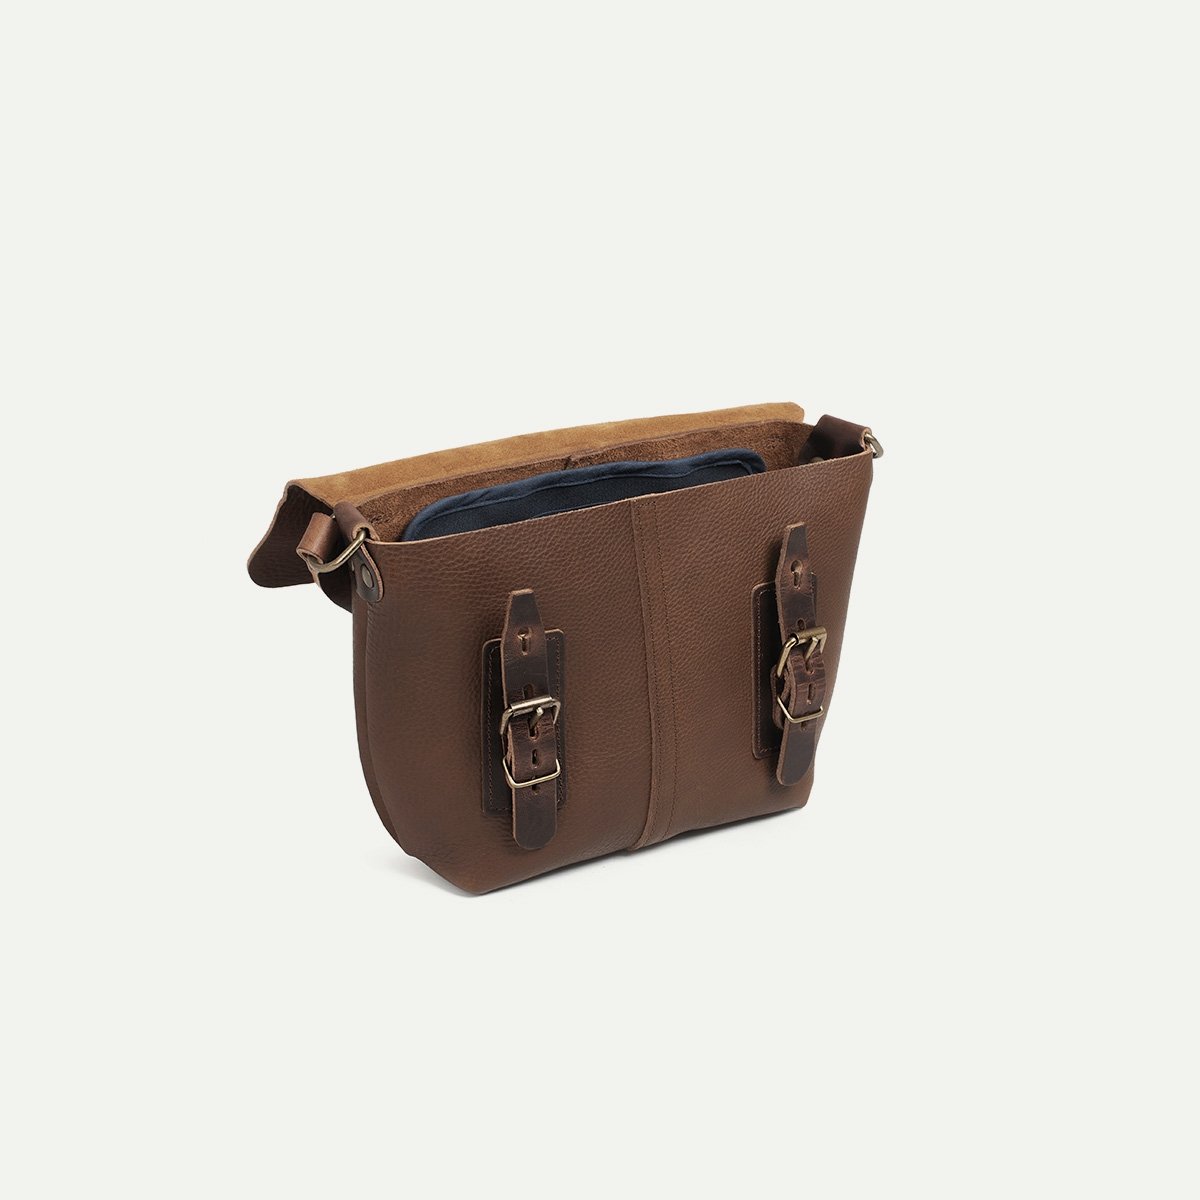 Louis satchel bag I Leather Bags for Men & Women, Made in France